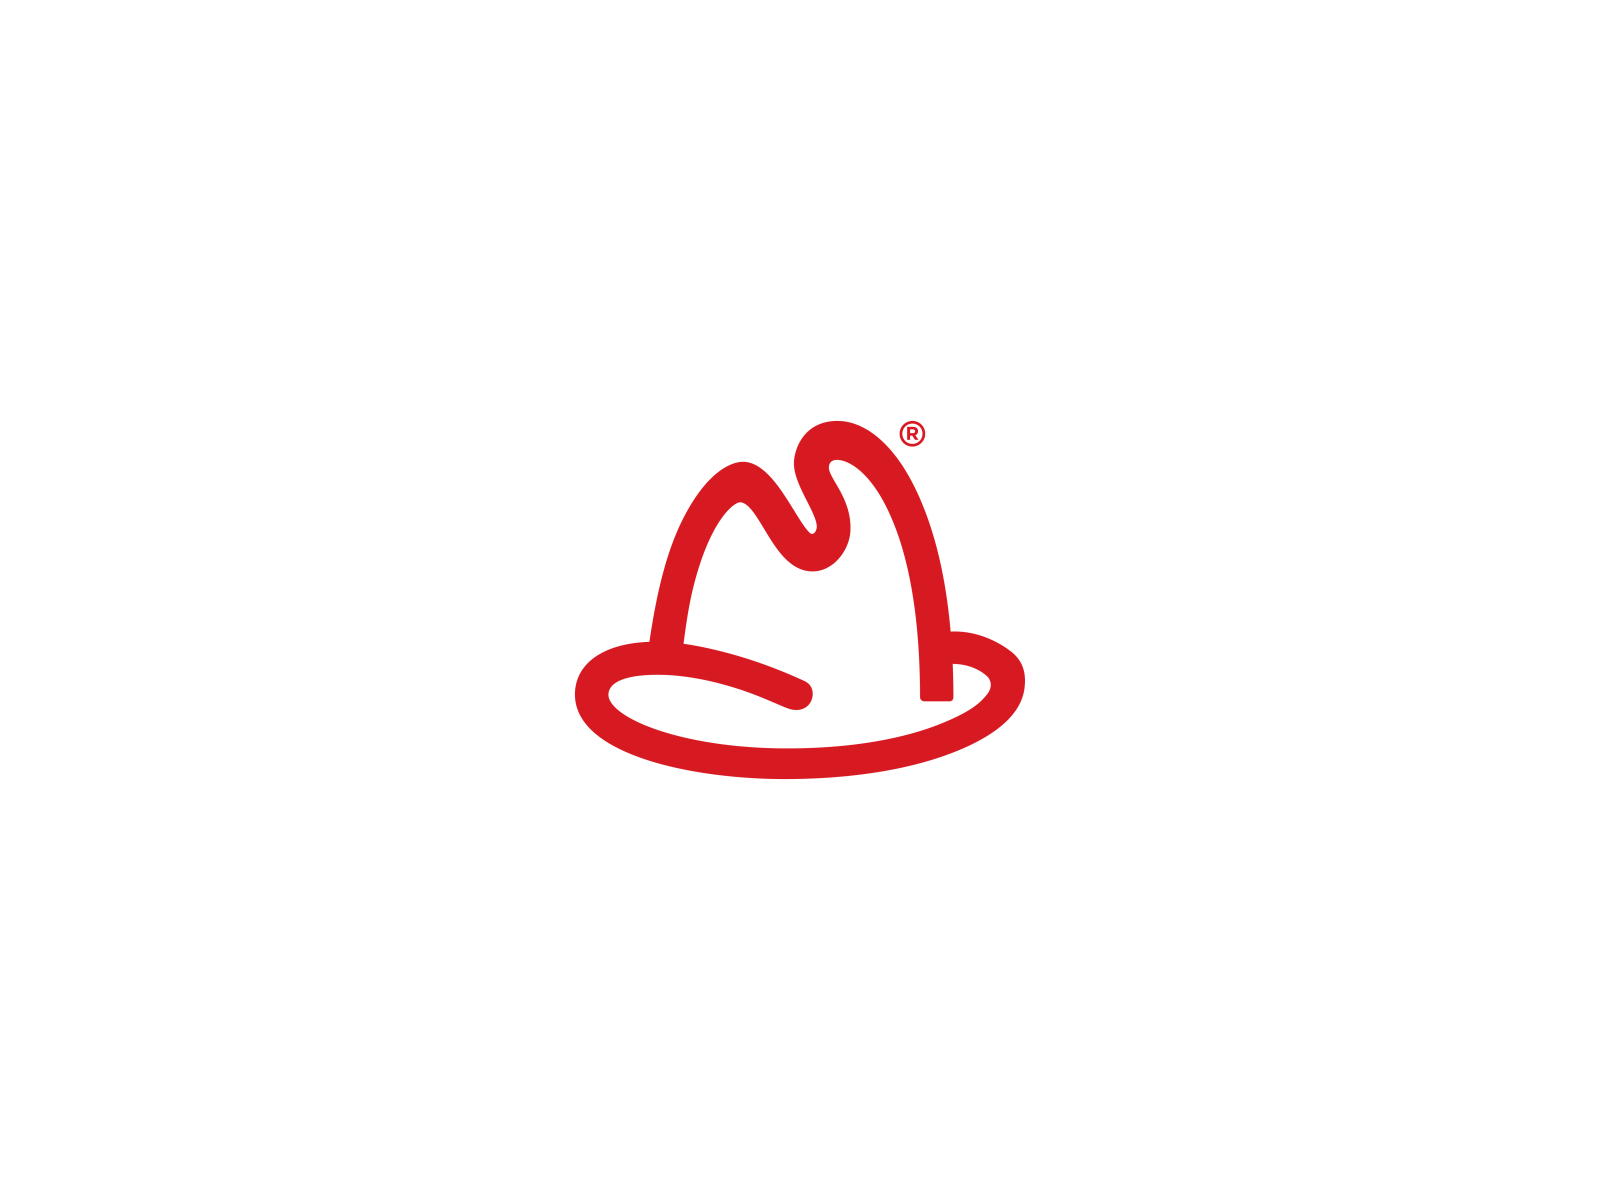 Arby's Logo Redesign by Adrian Onea on Dribbble